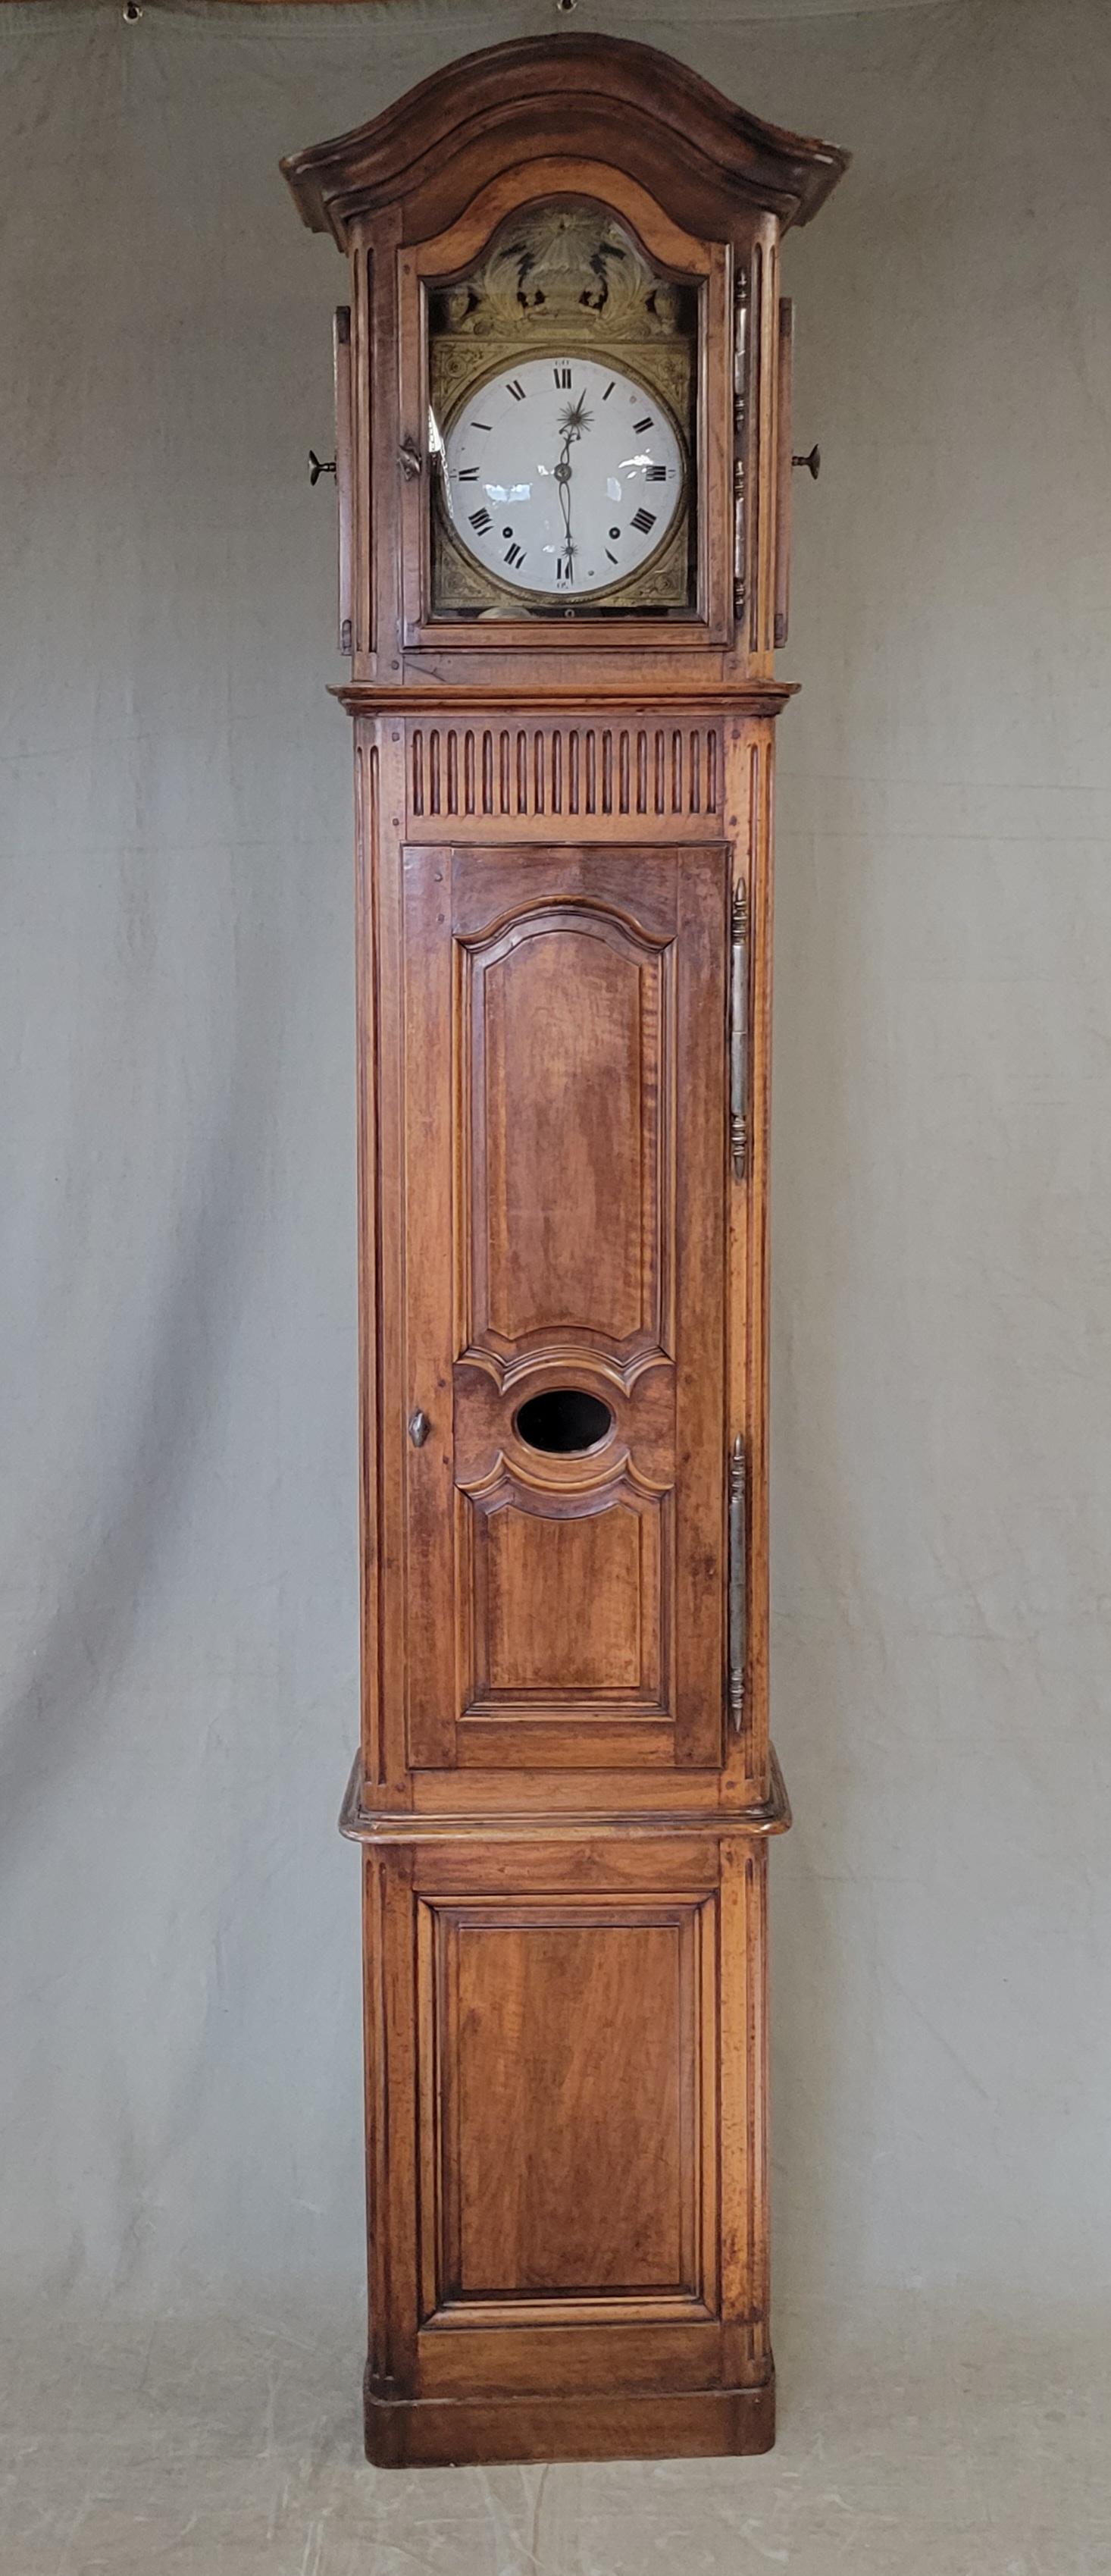 A stately antique French Provincial walnut tall case clock with an enamel face and embossed brass surround. Charming blue print wallpaper on the inside of the top clock case portion. Side door open which enables winding of the clock. Clock winding